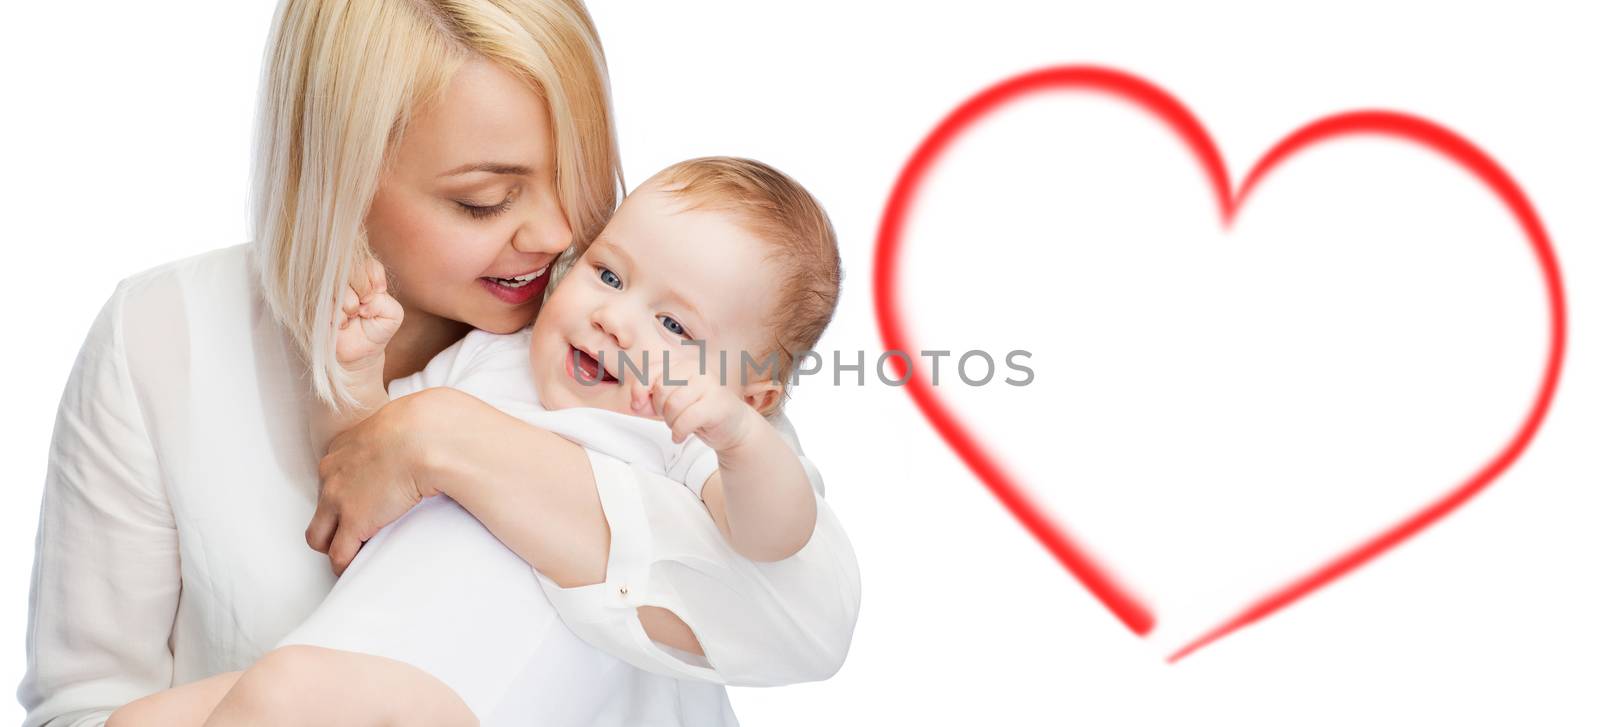 family, child and parenthood concept - happy mother with smiling baby